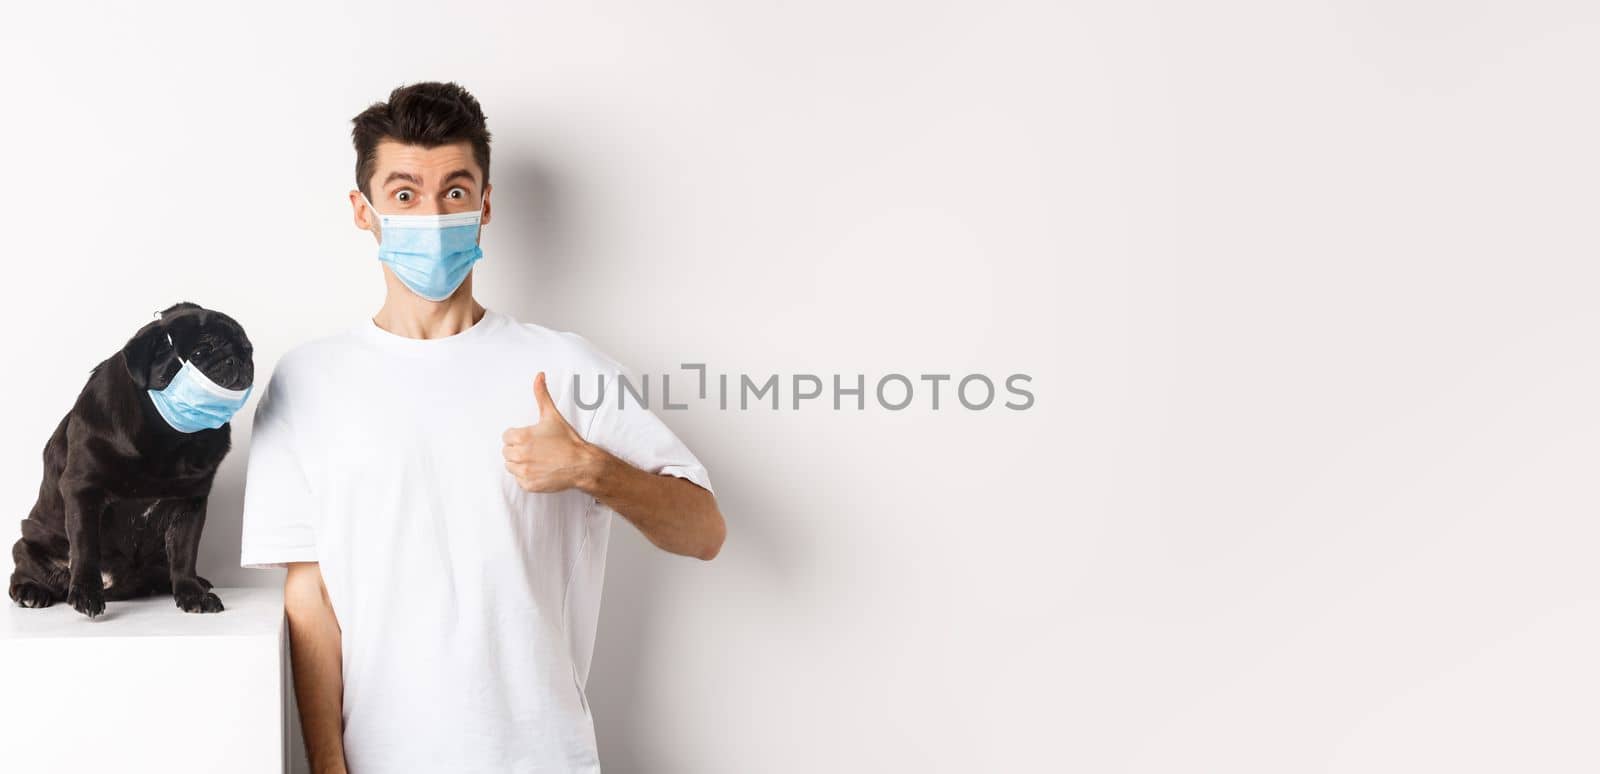 Covid-19, animals and quarantine concept. Image of funny young man and small dog in medical masks, owner showing thumb up in approval, praise something, white background.